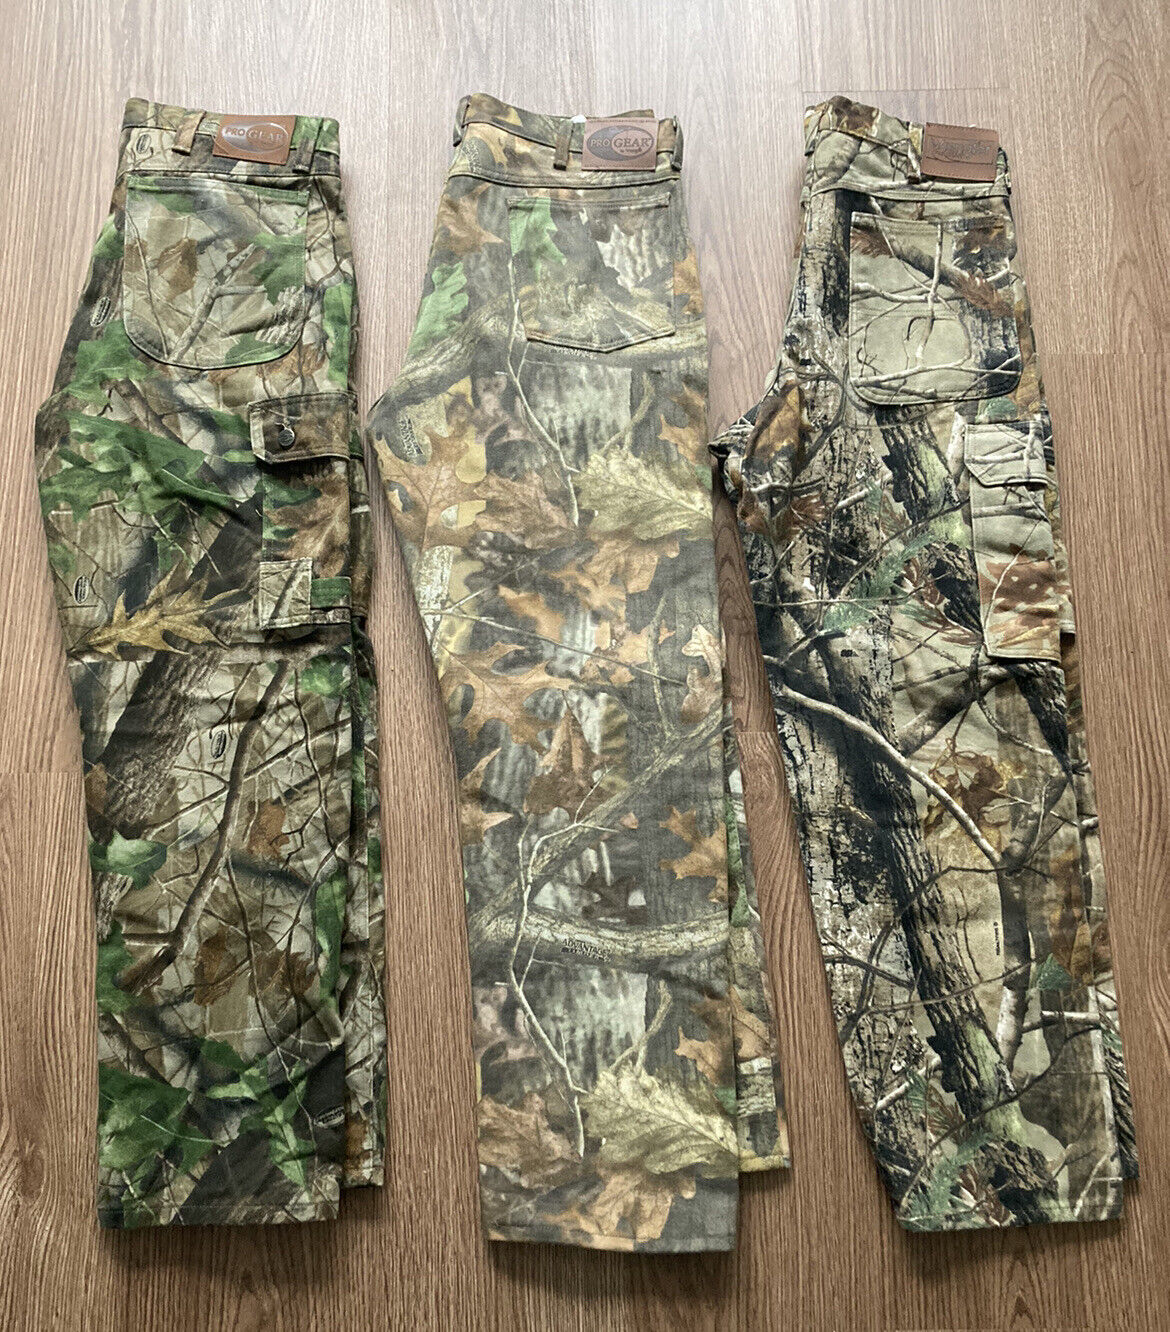 3 Pairs Wrangler Pro Gear Mens Camouflage Cargo Camo P Max 85% OFF 1 2 25% OFF Jeans